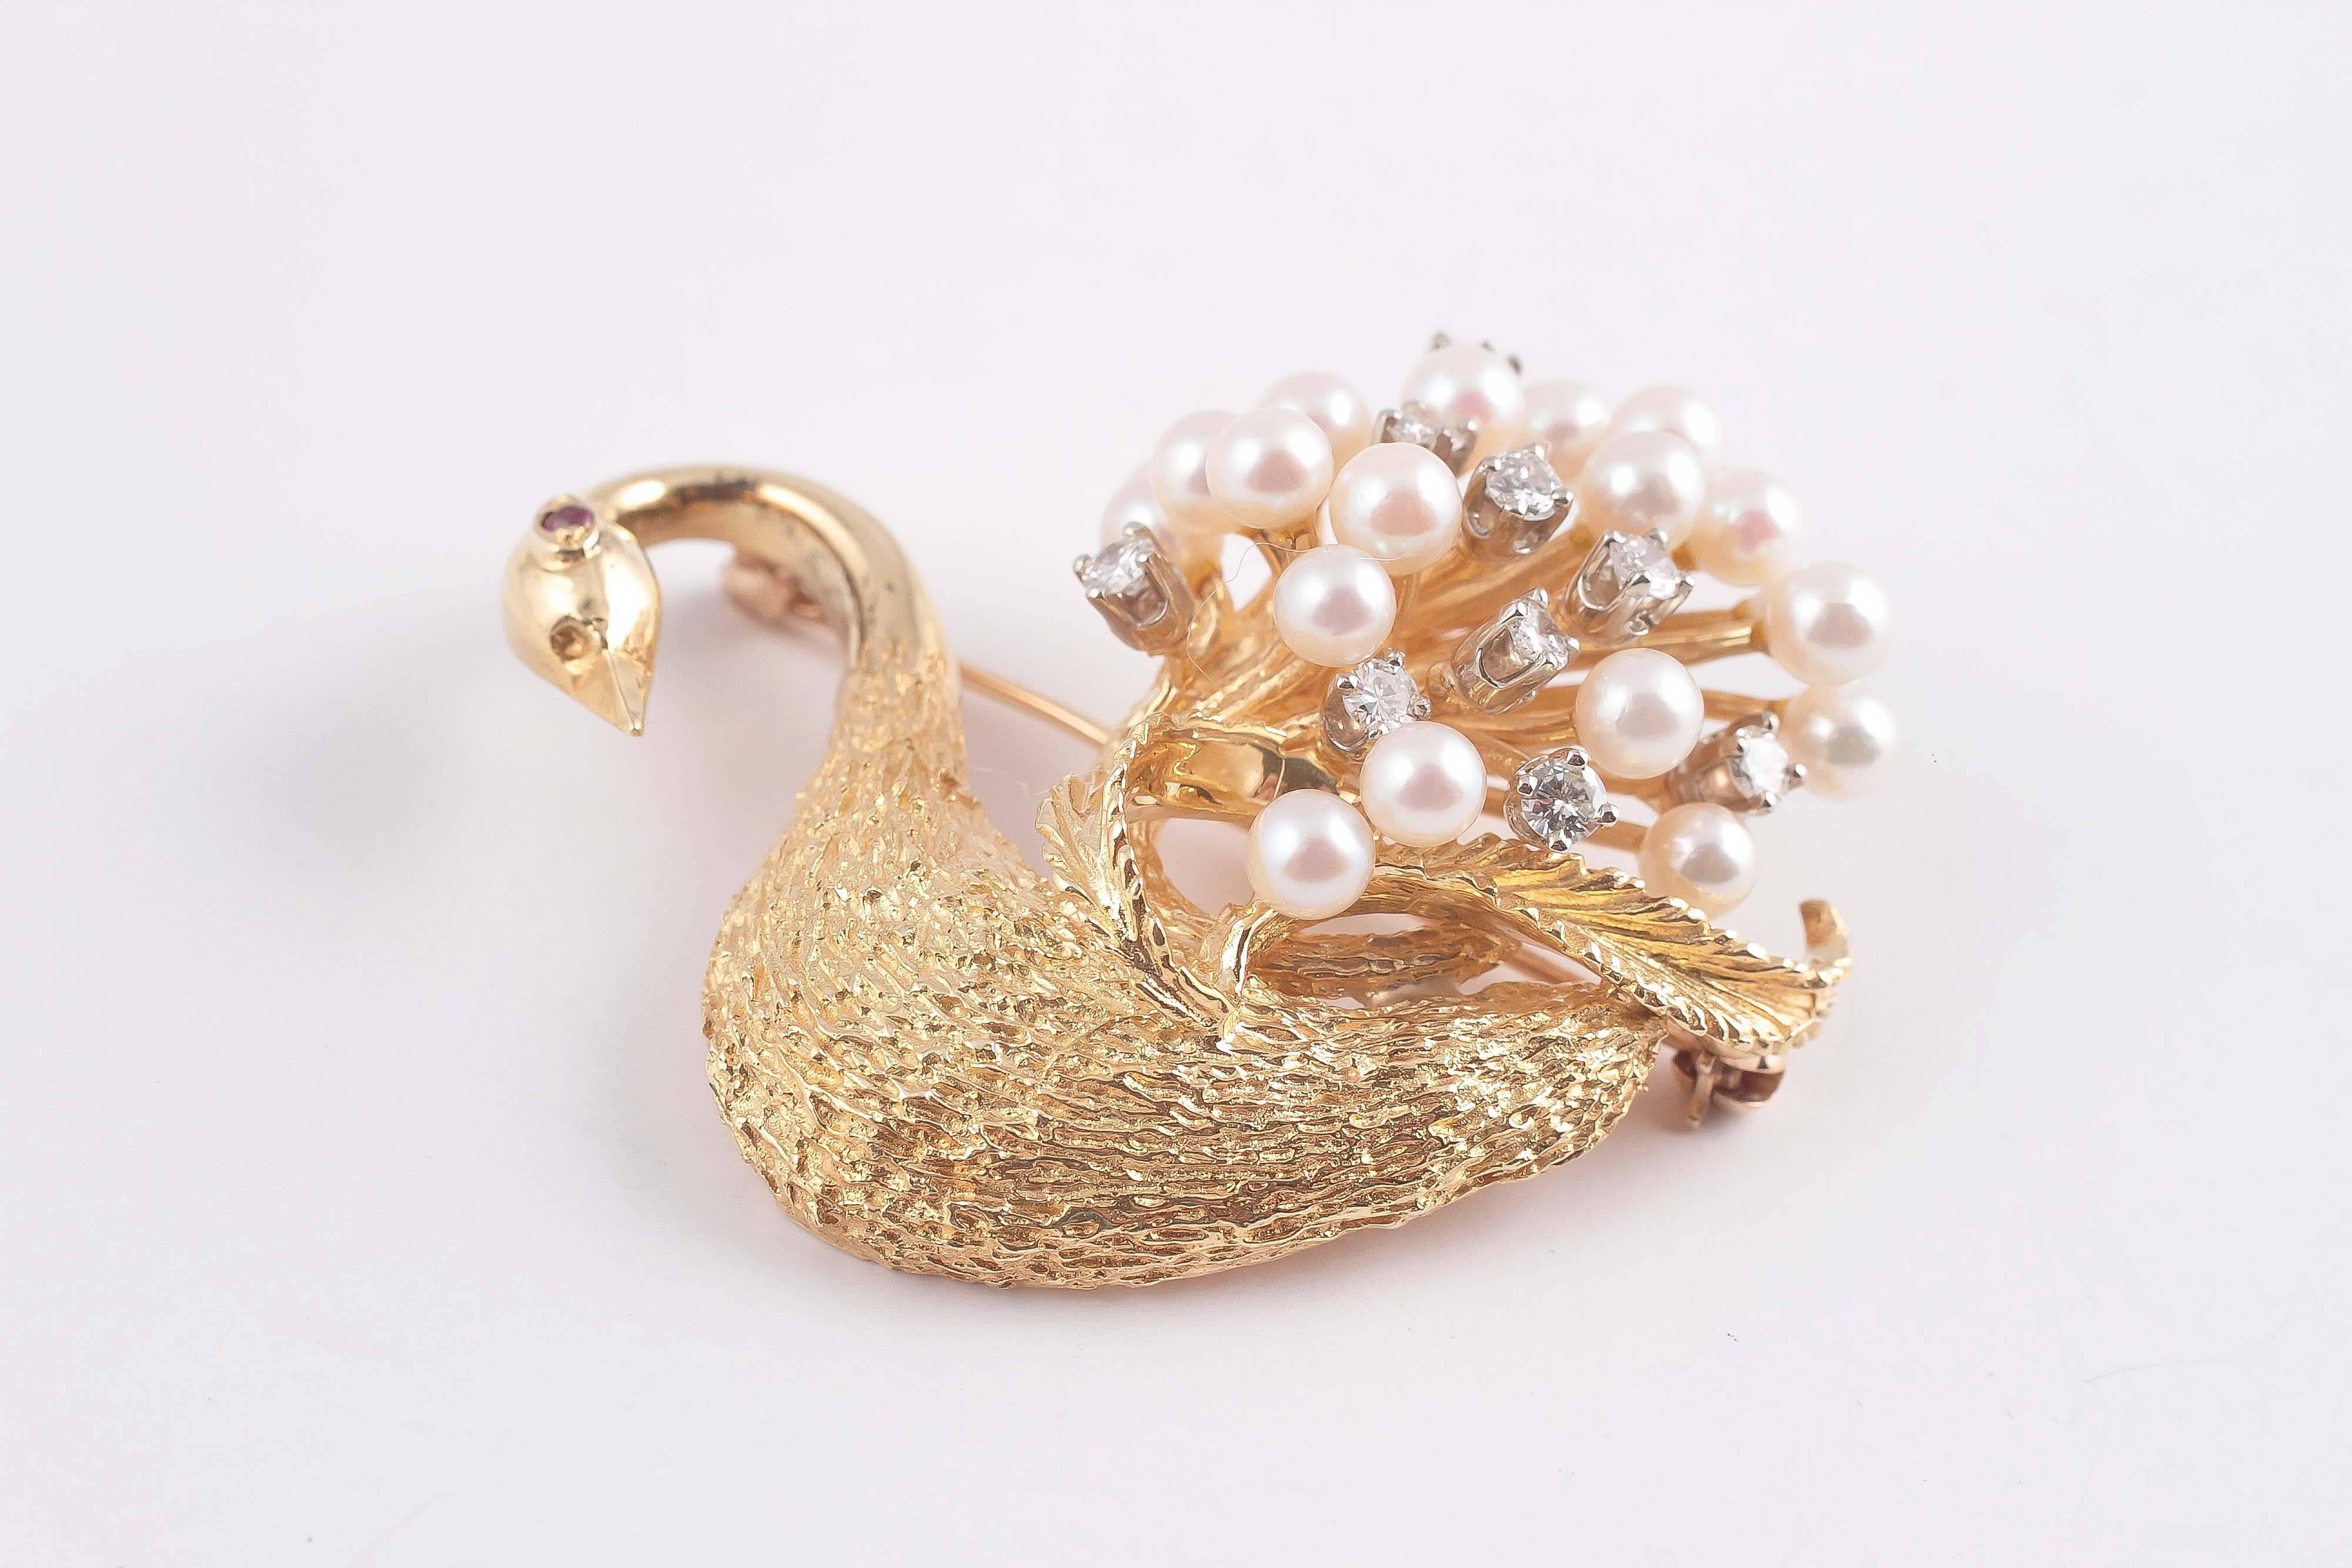 18 Karat yellow gold, textured swan gracefully swimming with pearls and diamonds tucked into feathers.  A single ruby completes the picture as the eye.  A bold 3 dimensional look from the mid-century 